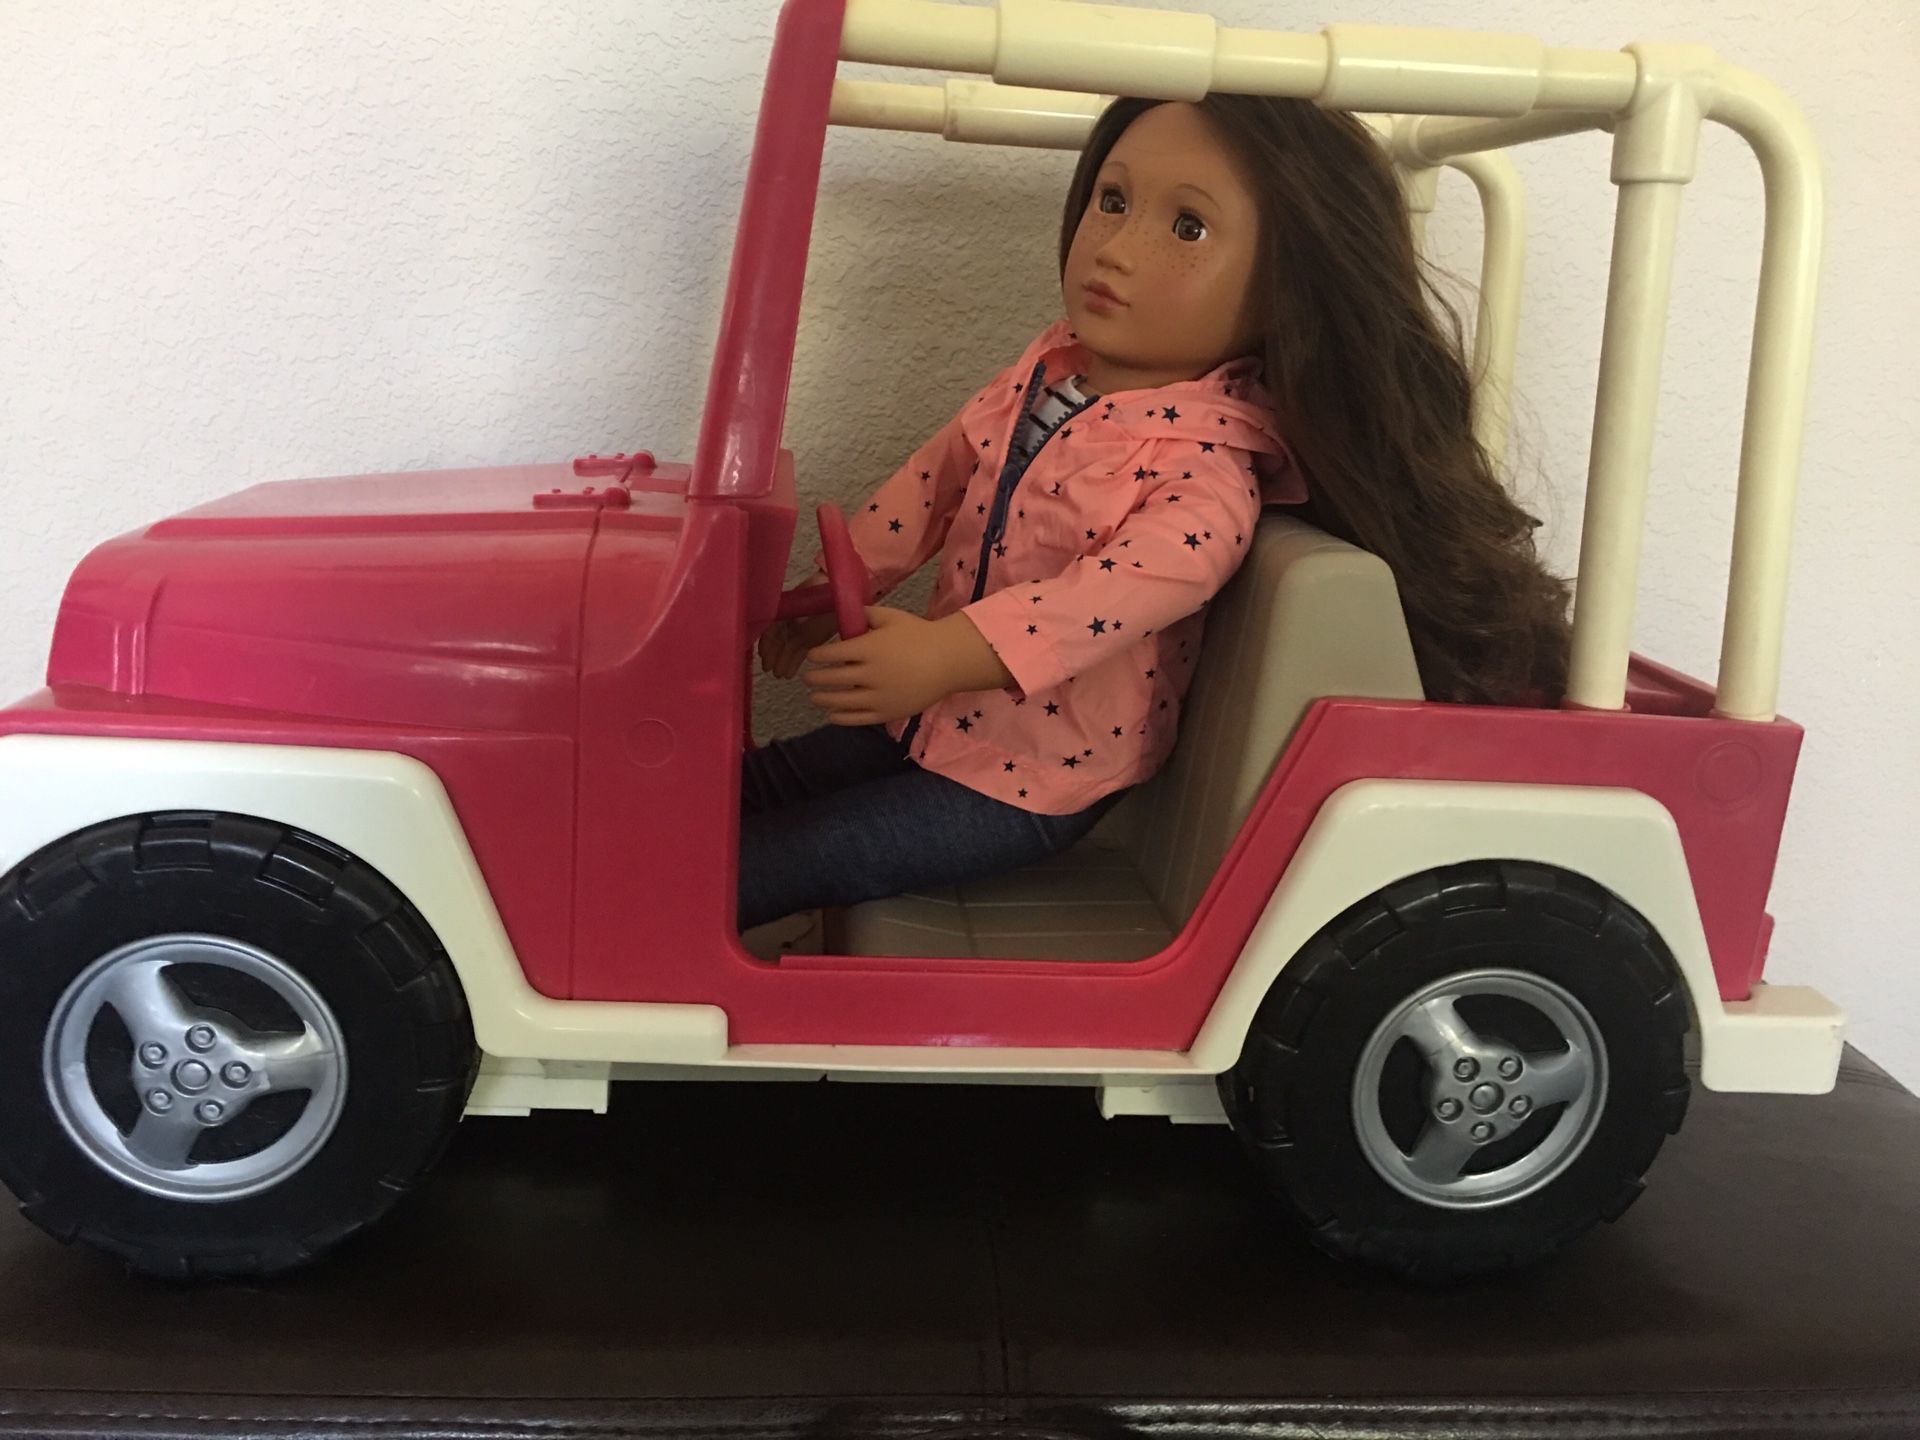 JEEP - FOR OUR GENERATION DOLL OR AMERICSN GIRL DOLL . JEEP HAS SOME FADING BUT IN VERY GOOD CONDITION !! DOLL NOT INCLUDED BUT CAN BE PURCHASED S